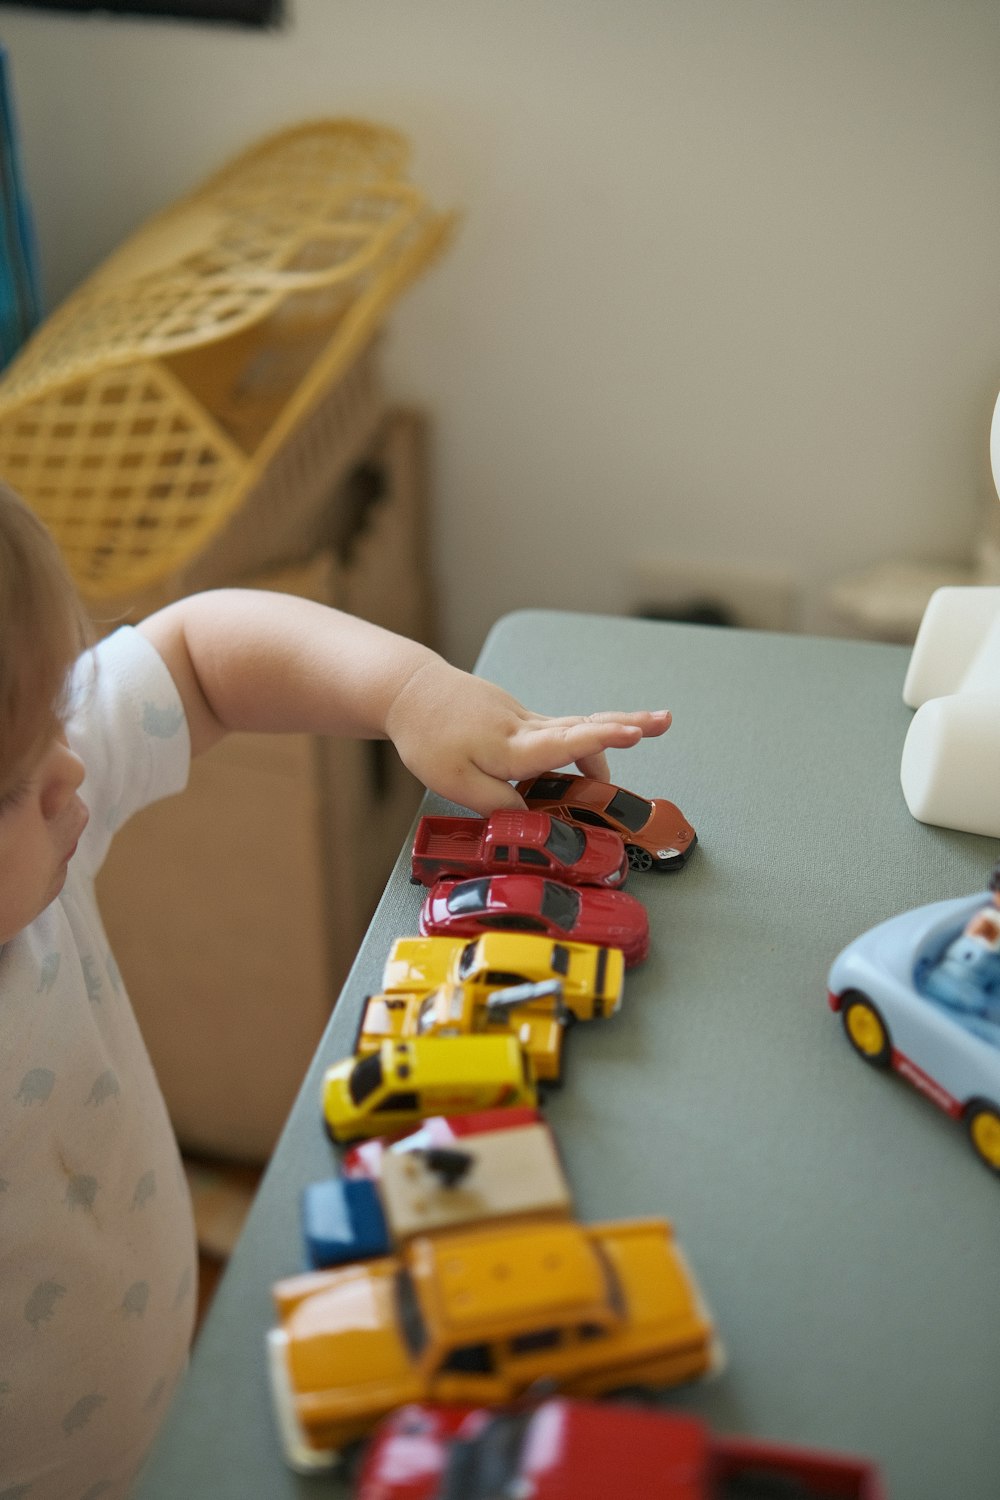 a baby playing with toy cars on a table